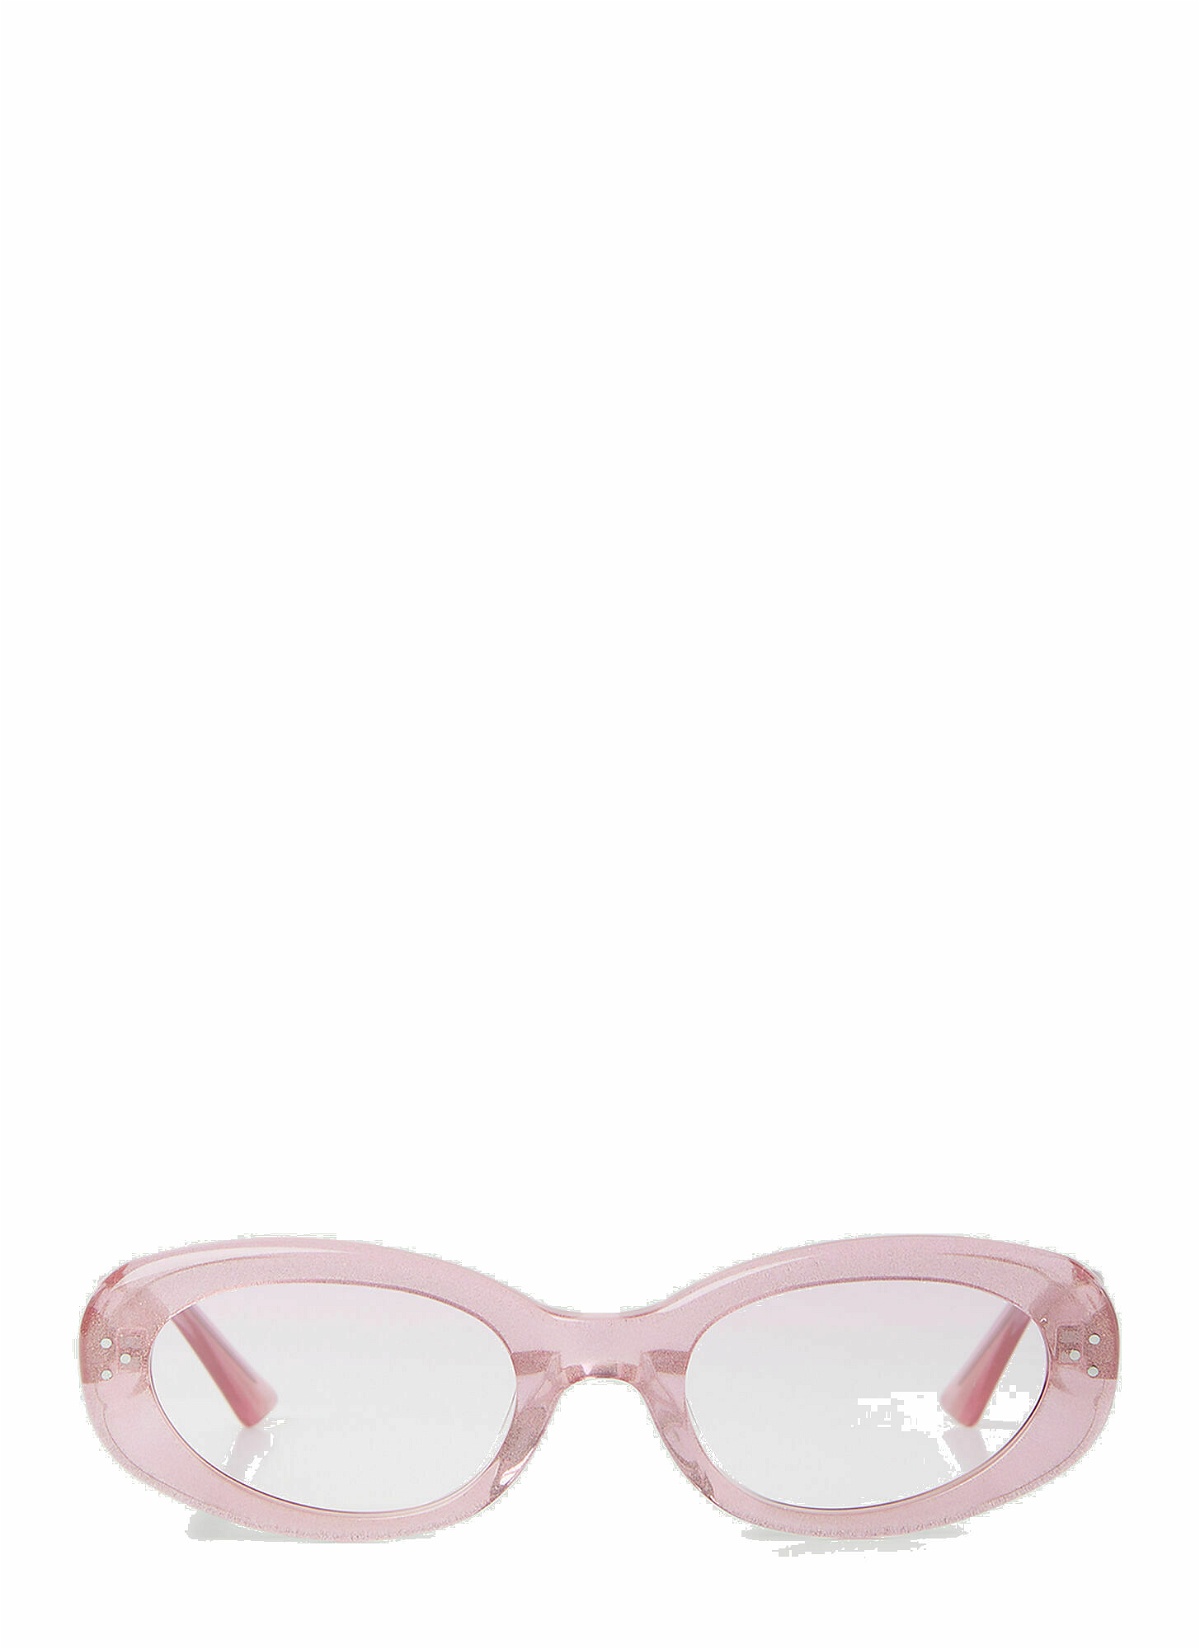 Photo: Gentle Monster - July Glasses in Pink